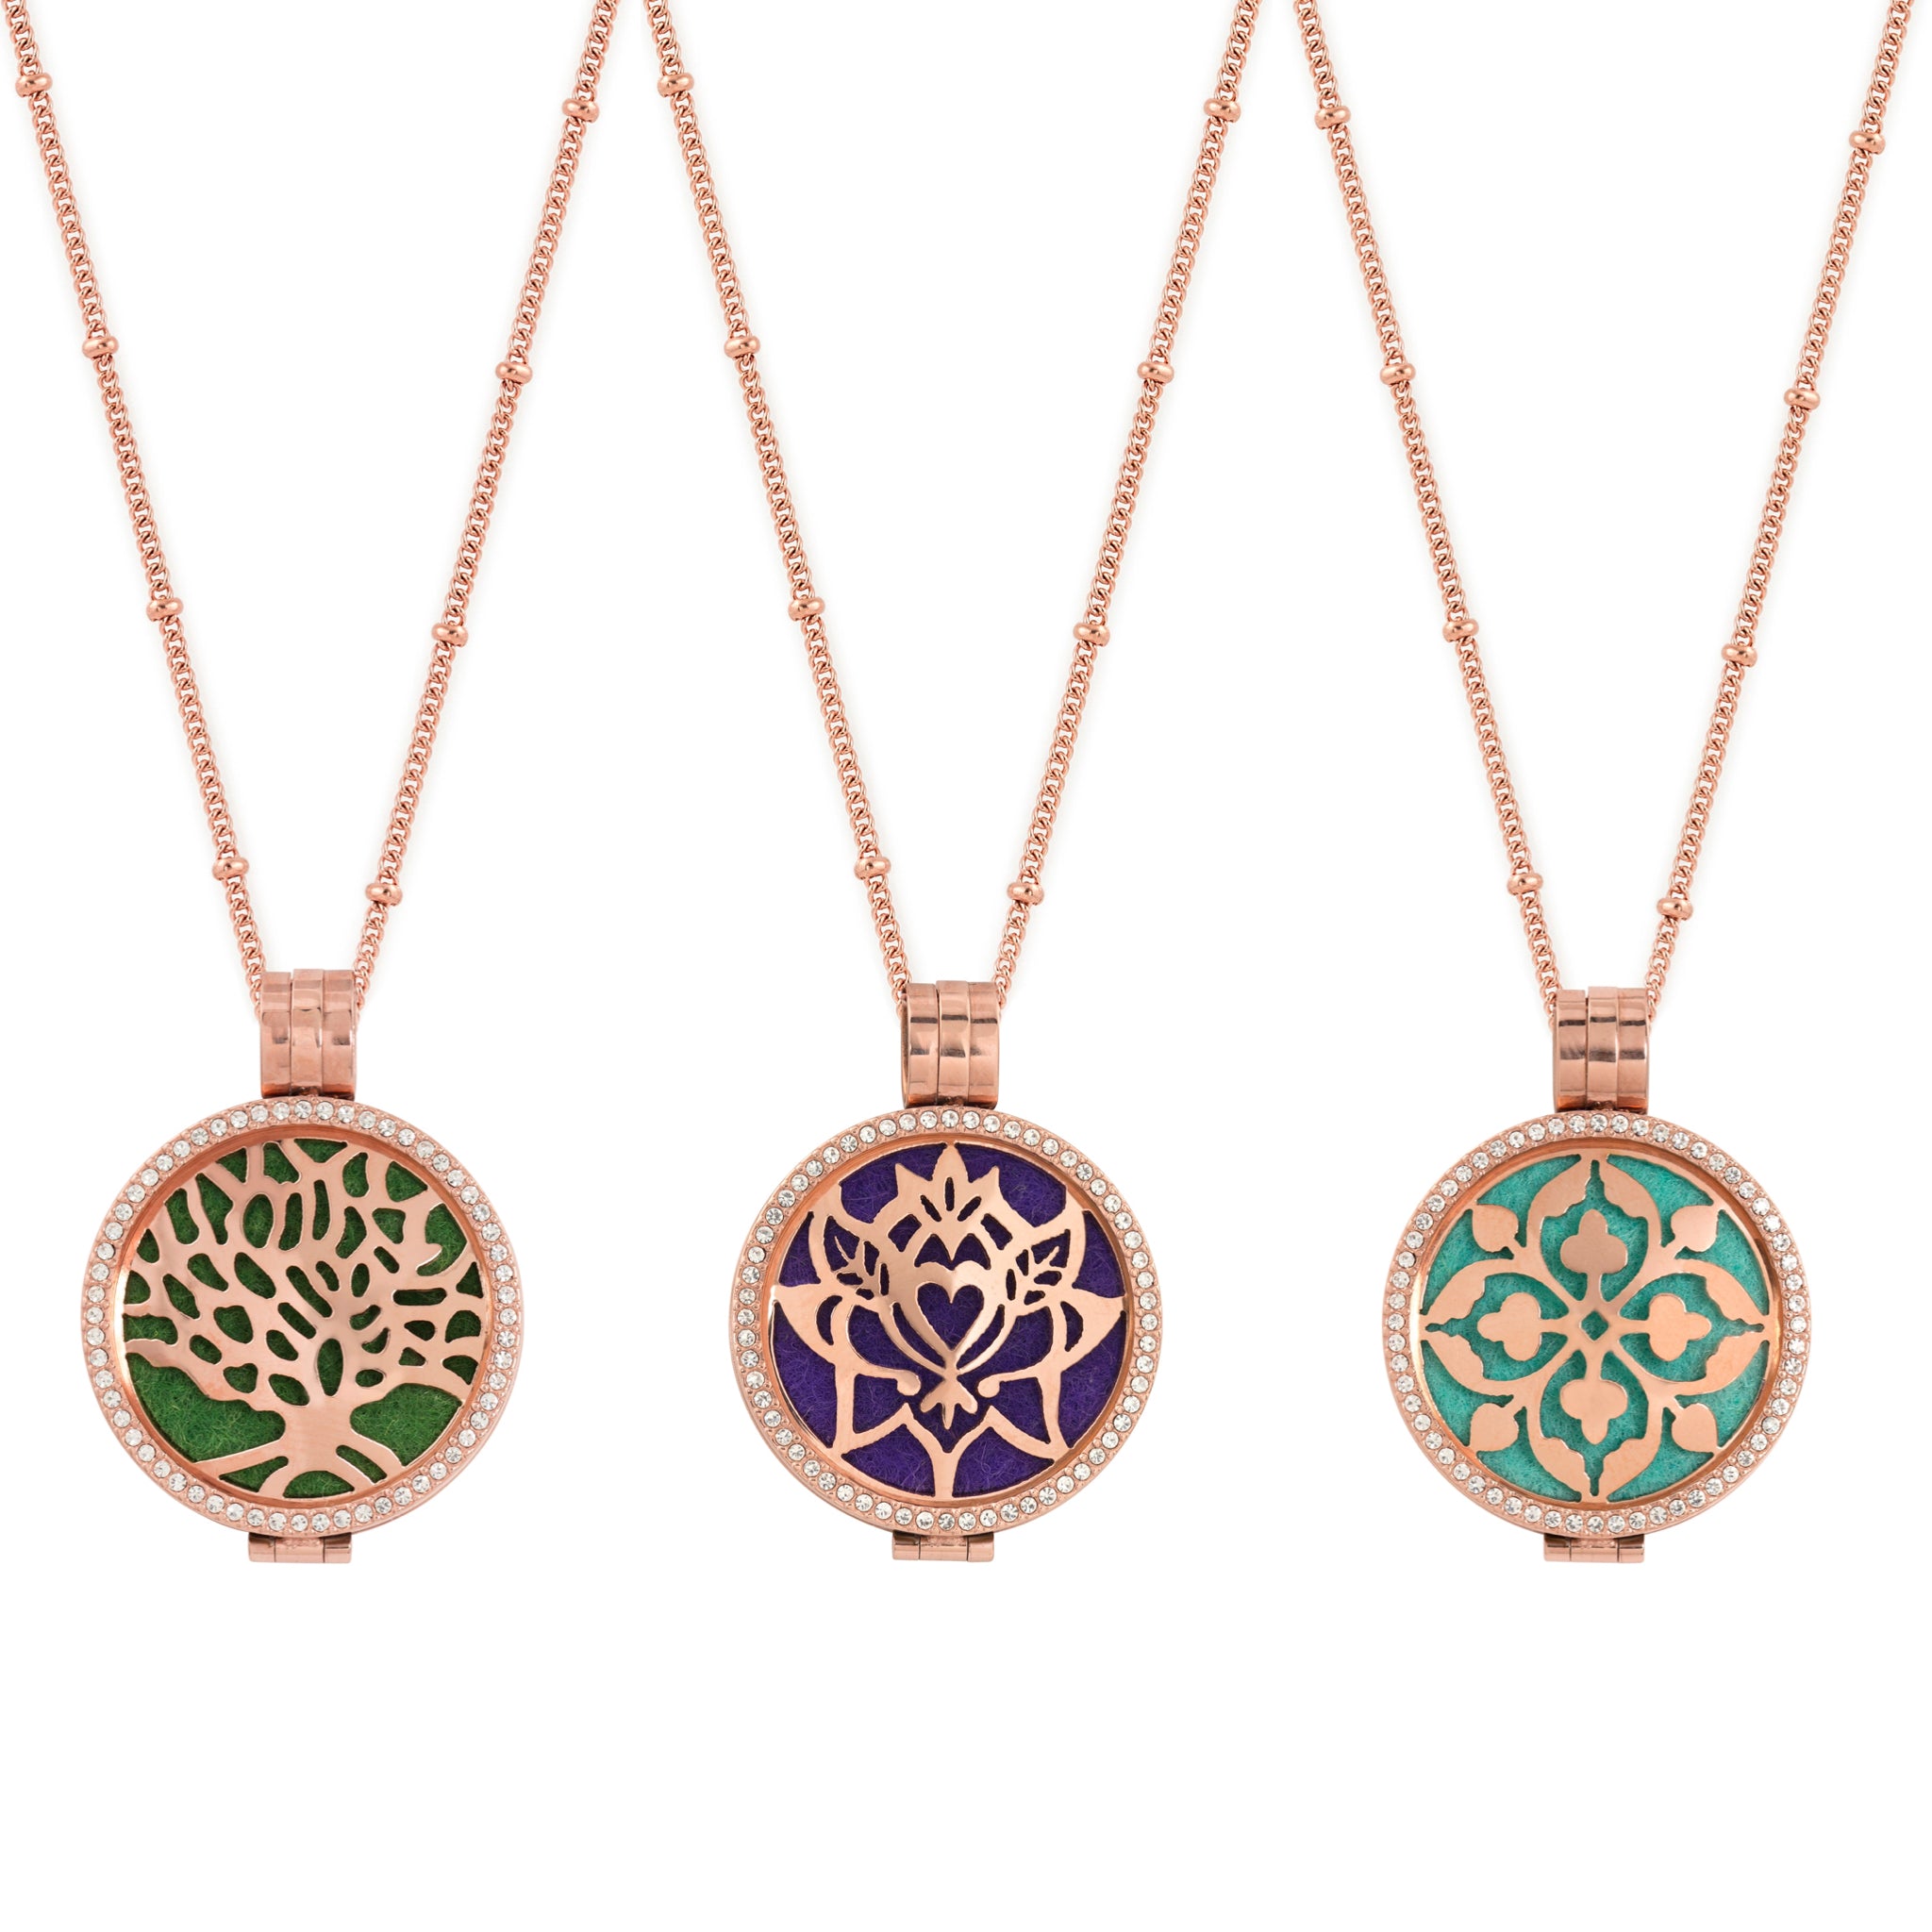 The amazing benefits of wearing diffuser jewellery